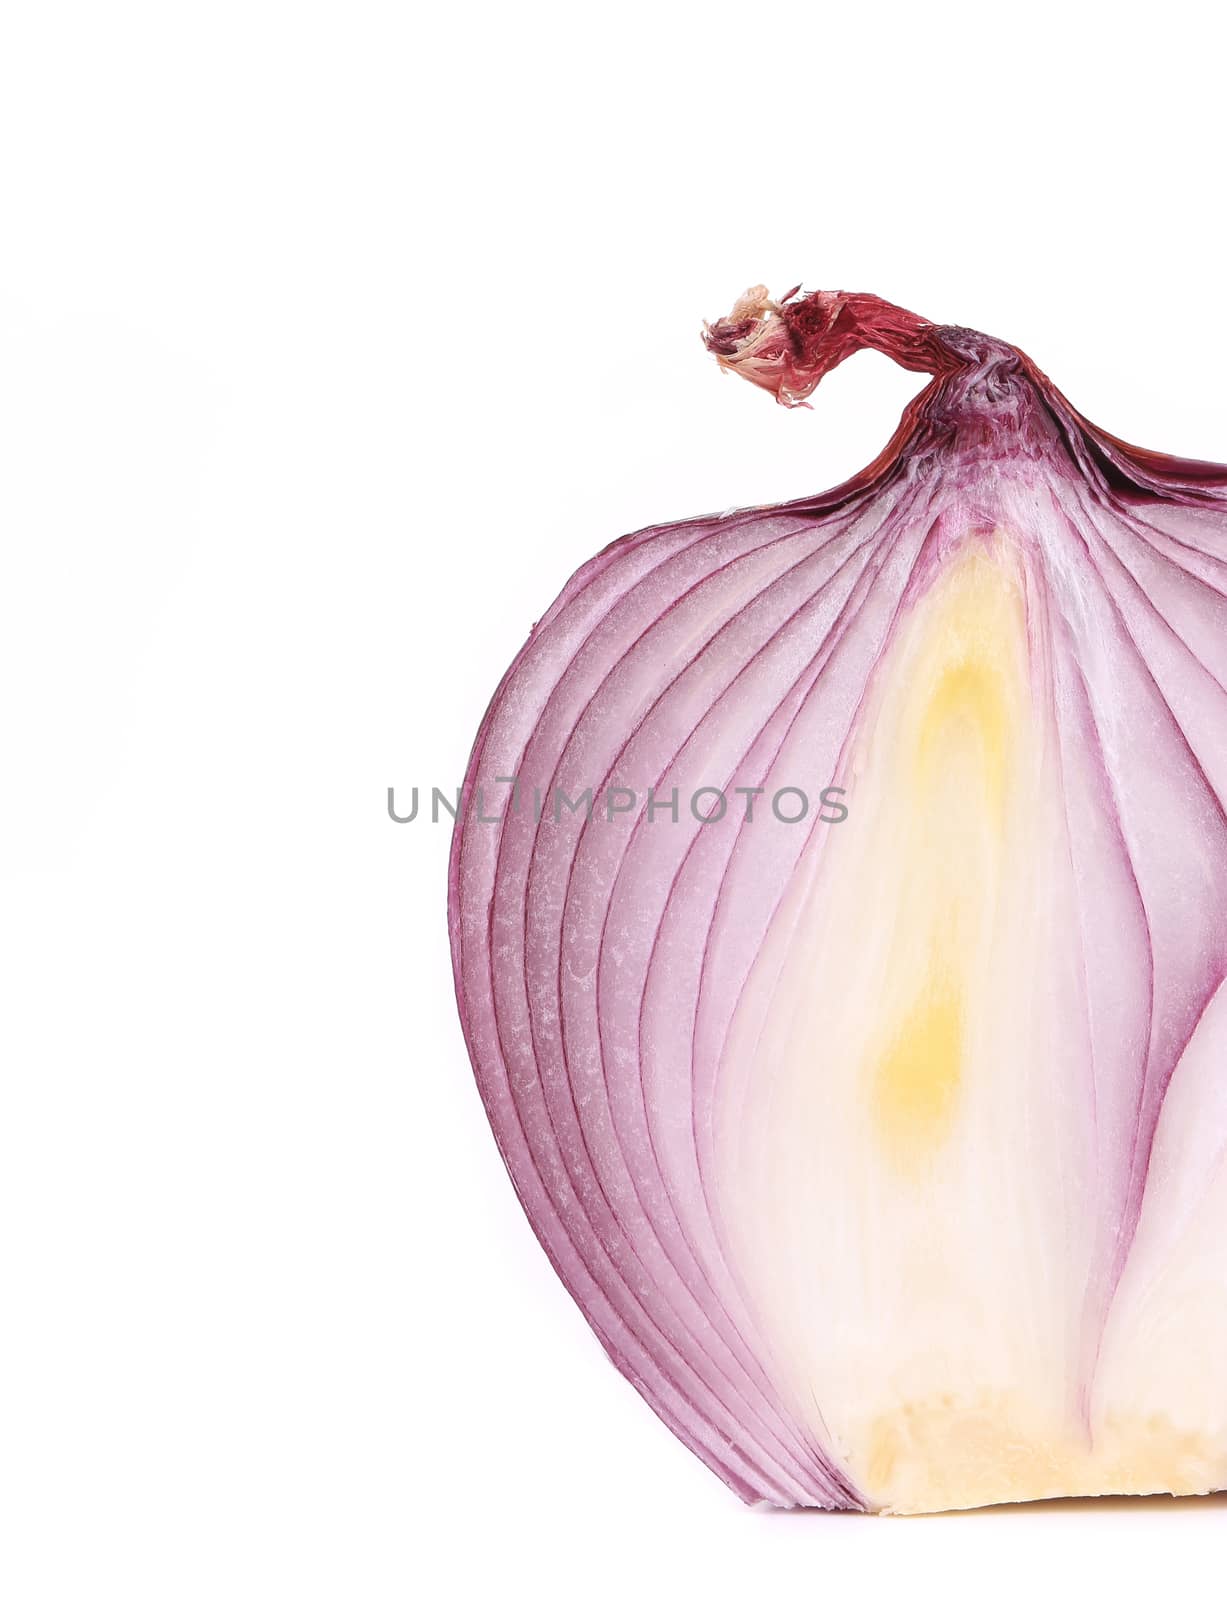 Cut red onion. Isolated on a white background.